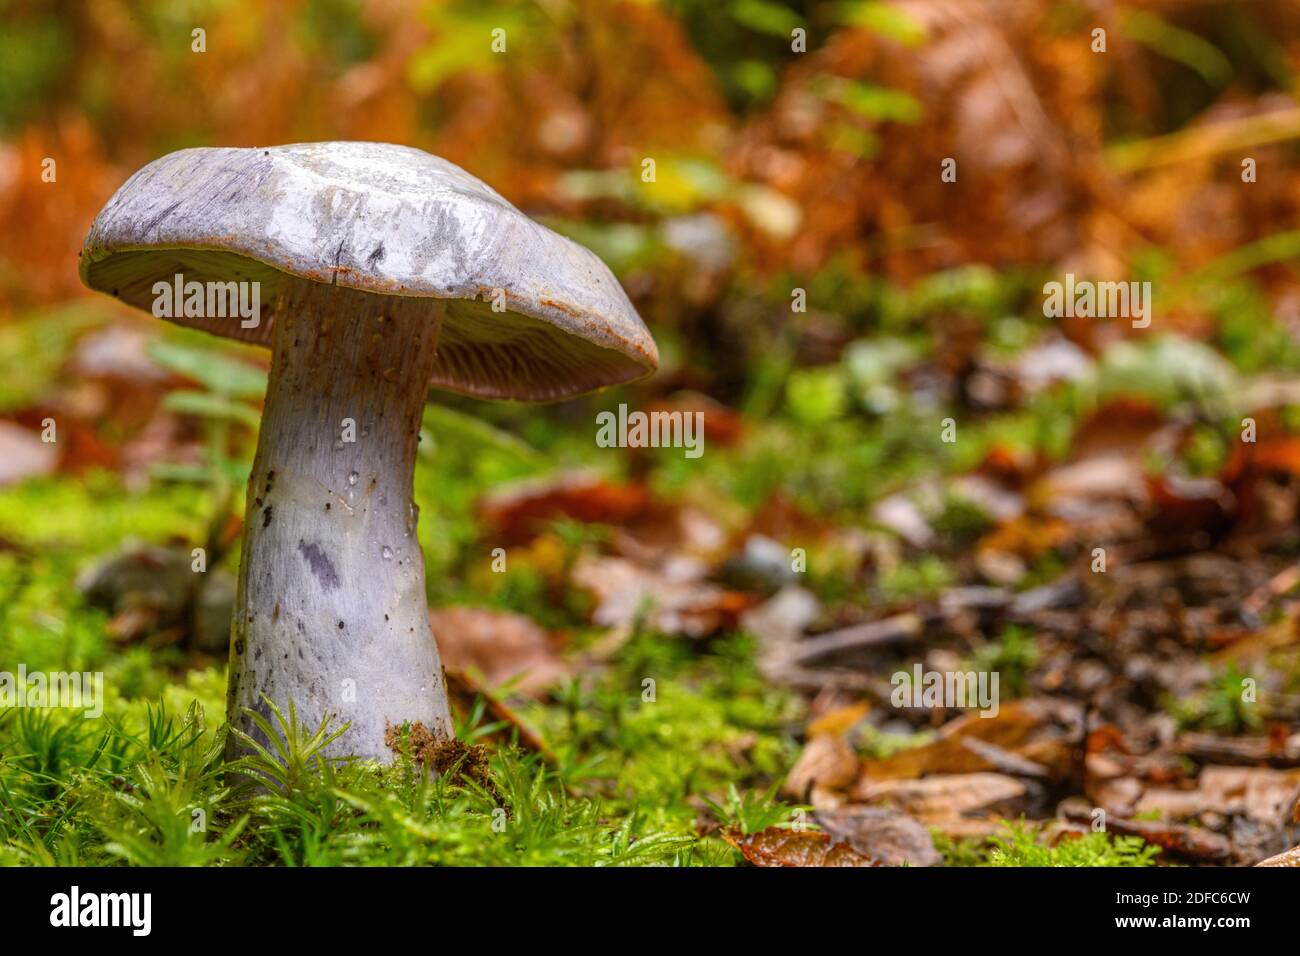 France, Somme (80), Cr?cy-en-Ponthieu, Cr?cy forest, Mushroom, Cortinarius paralbocyaneus Stock Photo